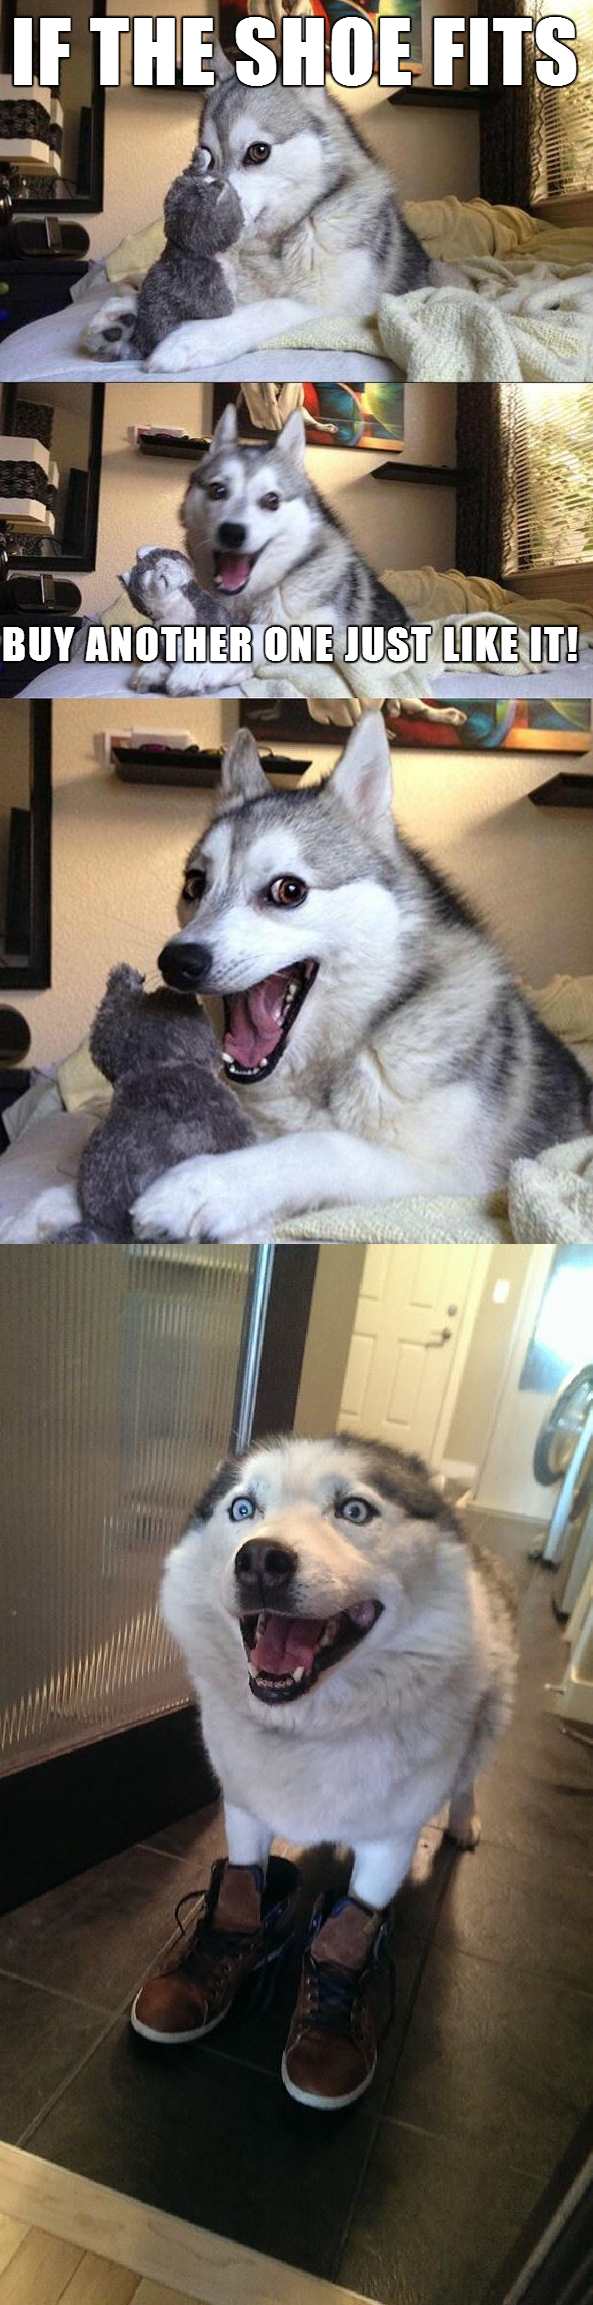 husky jokes - If The Shoe Fits Buy Another One Lust It!